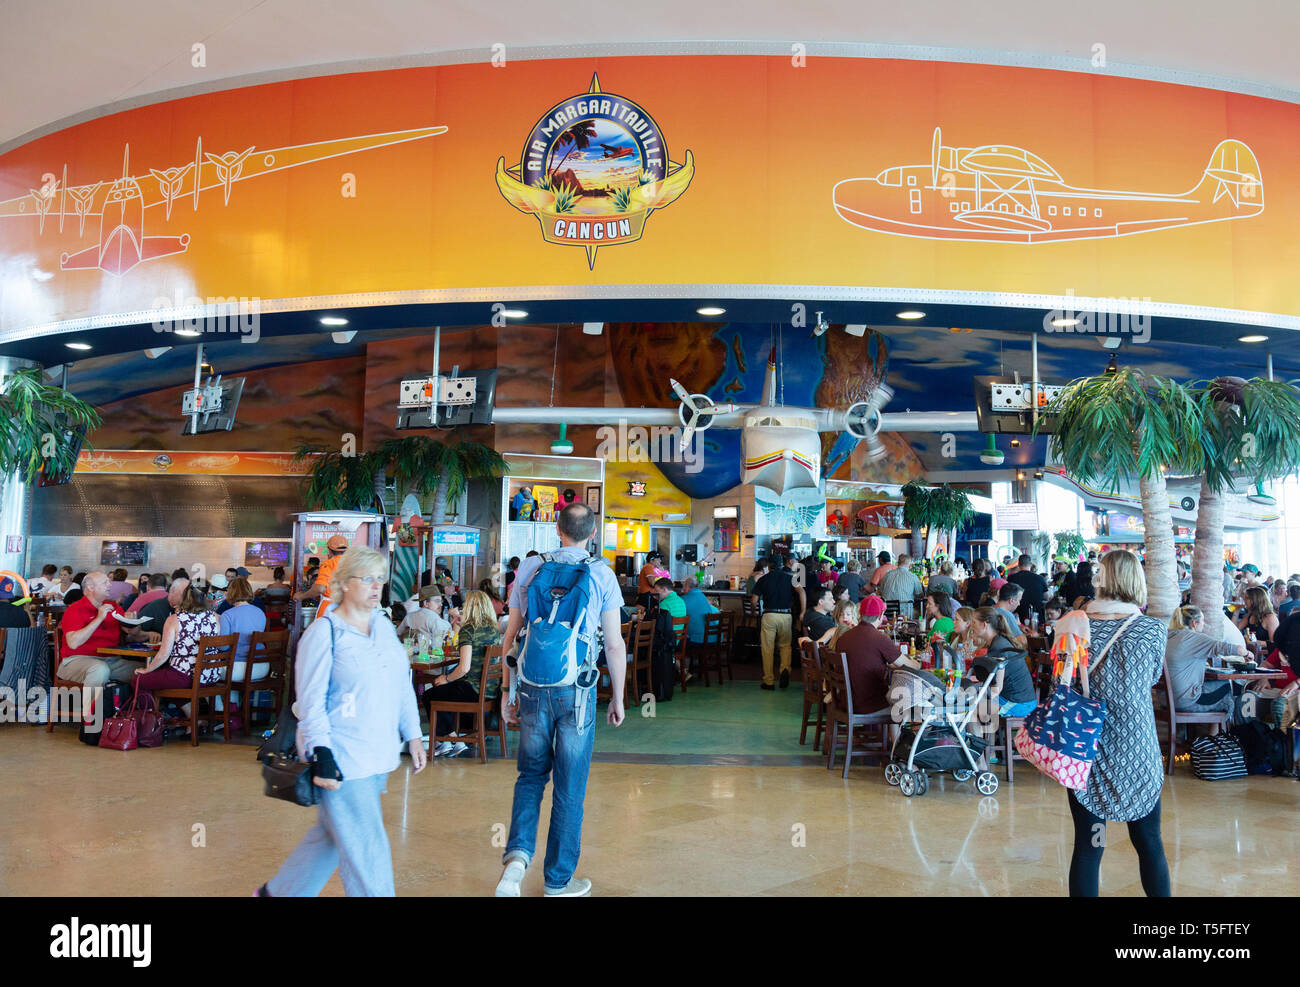 People at the Air Margaritaville restaurant, departures terminal 3, Cancun airport Mexico Stock Photo